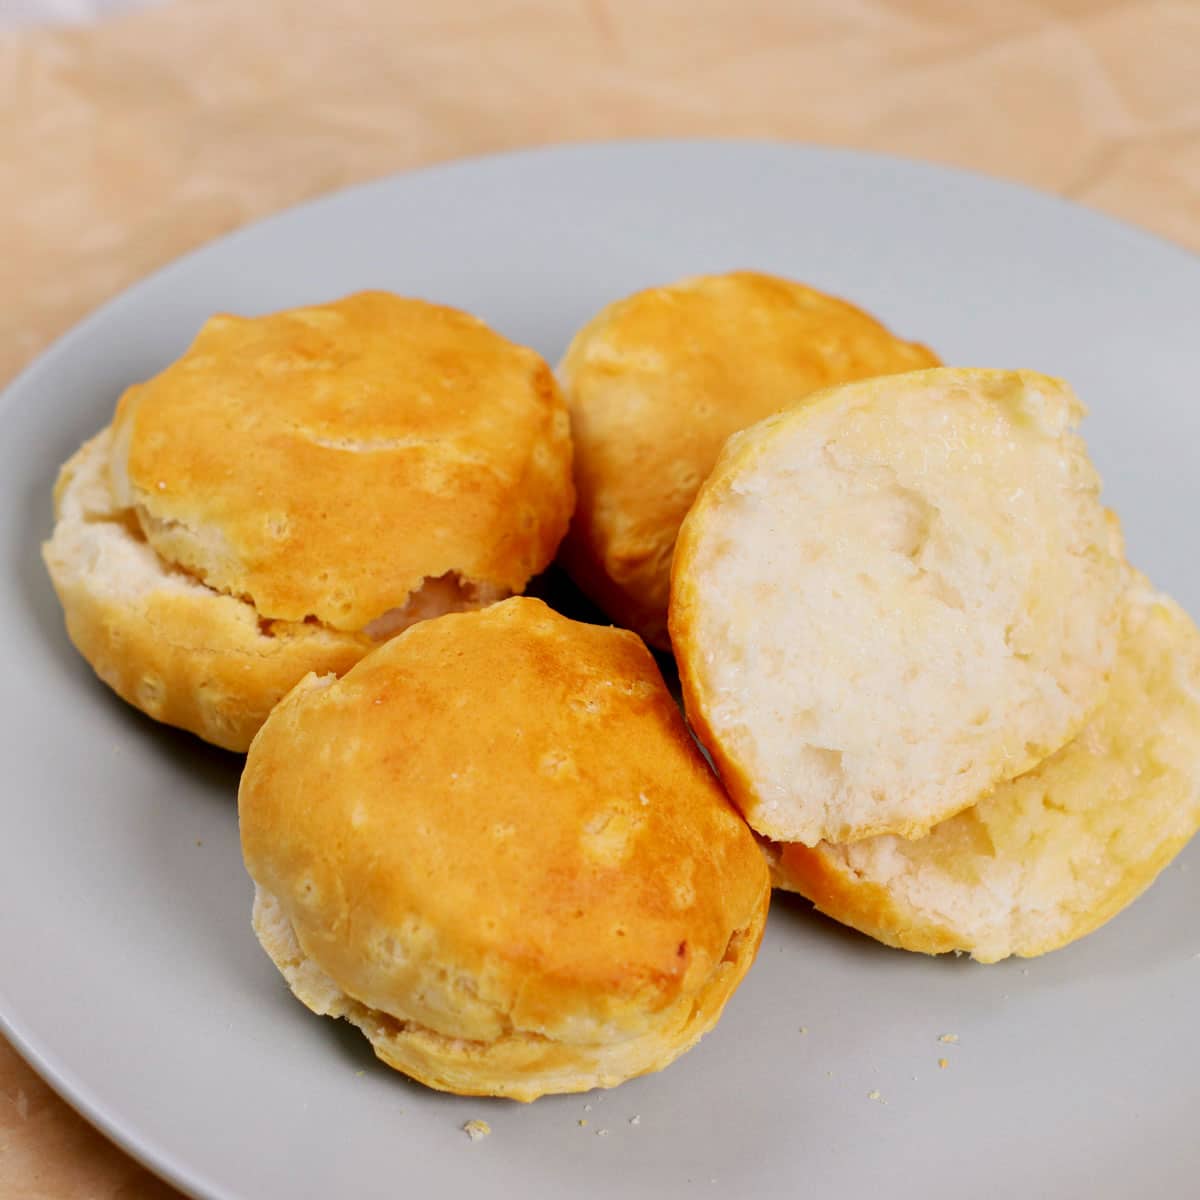 Air fried Pillsbury country biscuits with butter, served on a plate.